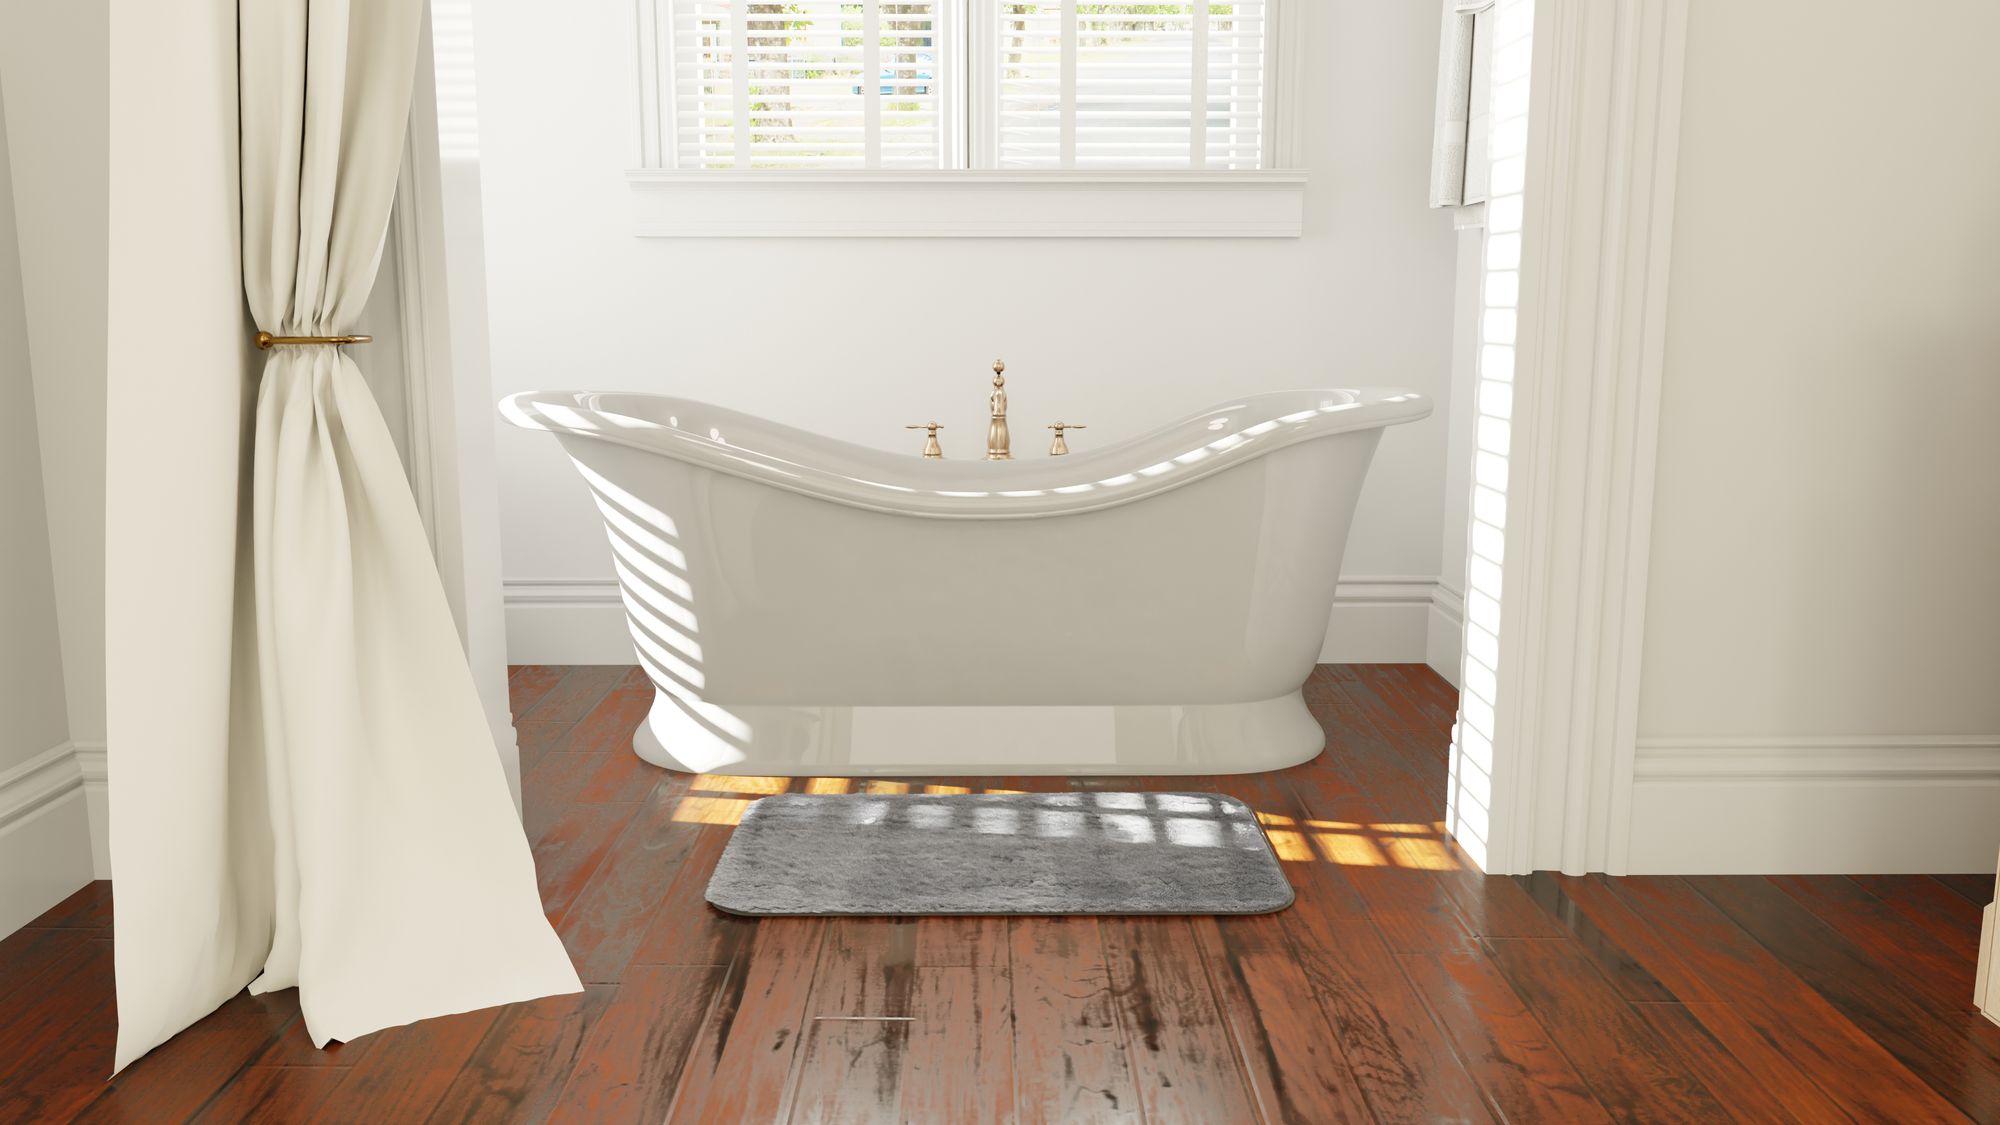 Elegant bathroom with a white clawfoot bathtub, sheer white curtains, wooden floor, and a dark gray bath mat placed in front of the tub.